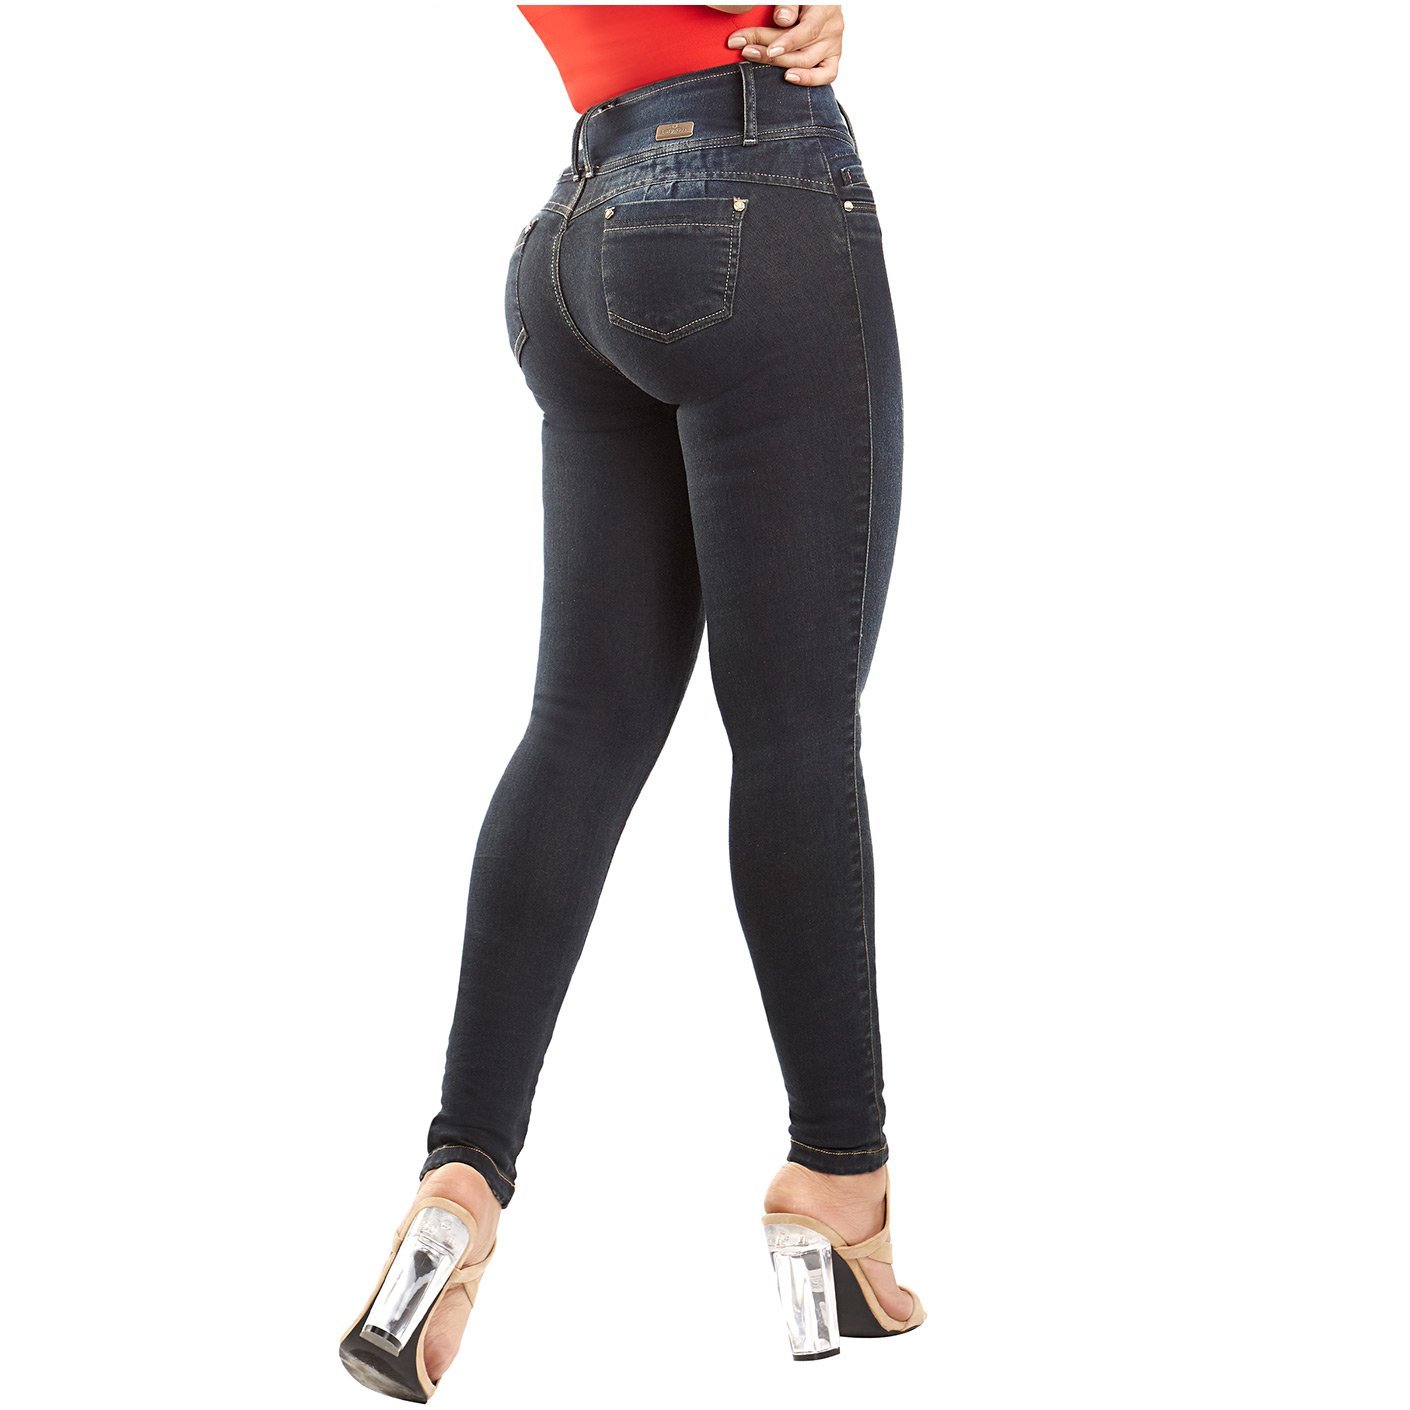 LATY ROSE CS3B04 Colombian Mid-Rise Butt Lifter Skinny Jeans - New England Supplier